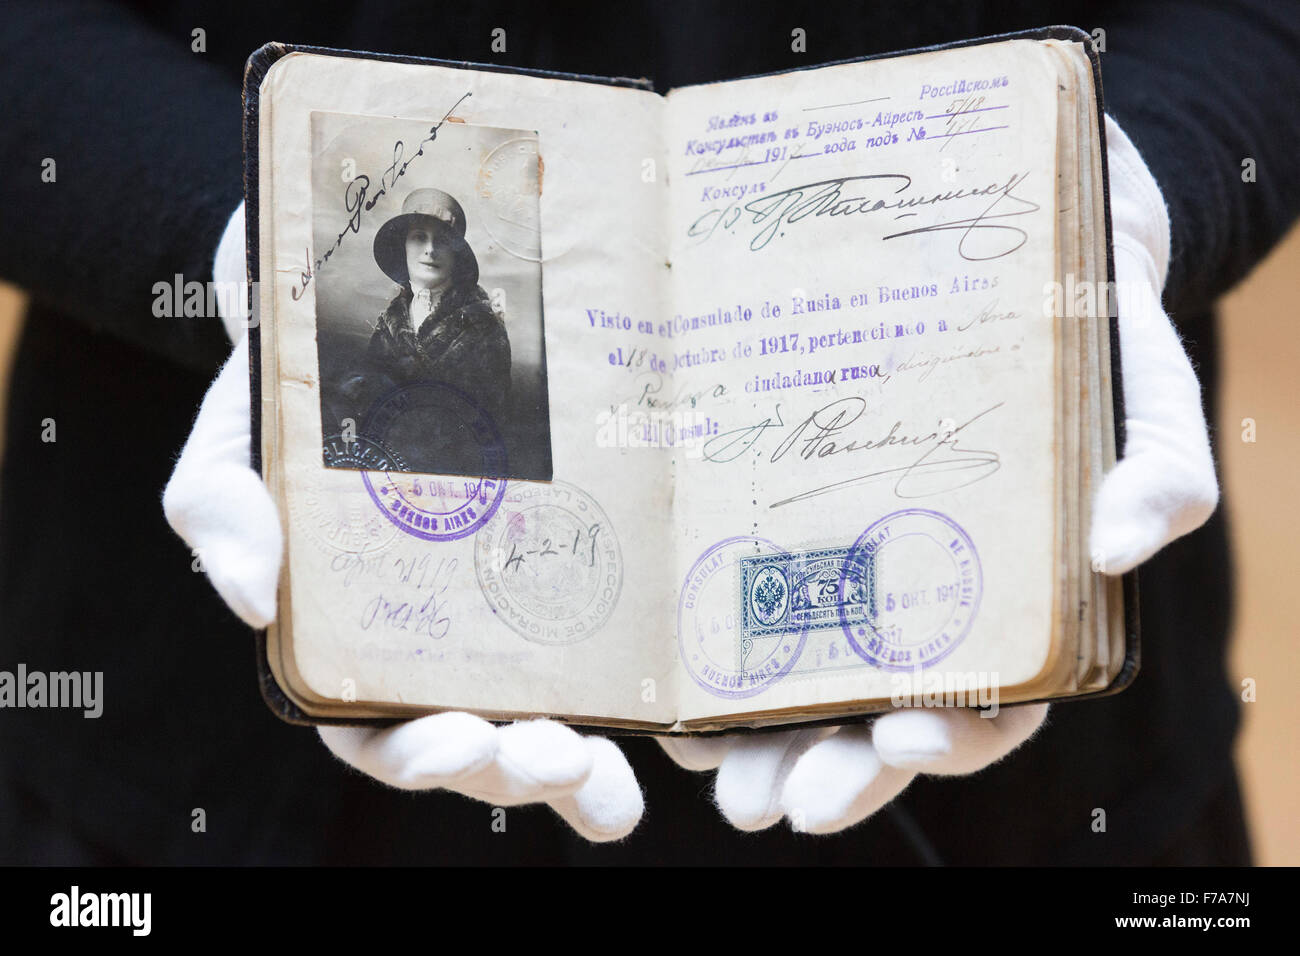 London, UK. 27 November 2015. Anna Pavlova's passport, estimate GBP 8,000-12,000. Christie's London announce a series of sales devoted to Russian culture and art. On 30 November the Russian Art sale featuring paintings and of works of art will take place followed by the Valuable Book and Manuscript sale on 1 December. Stock Photo